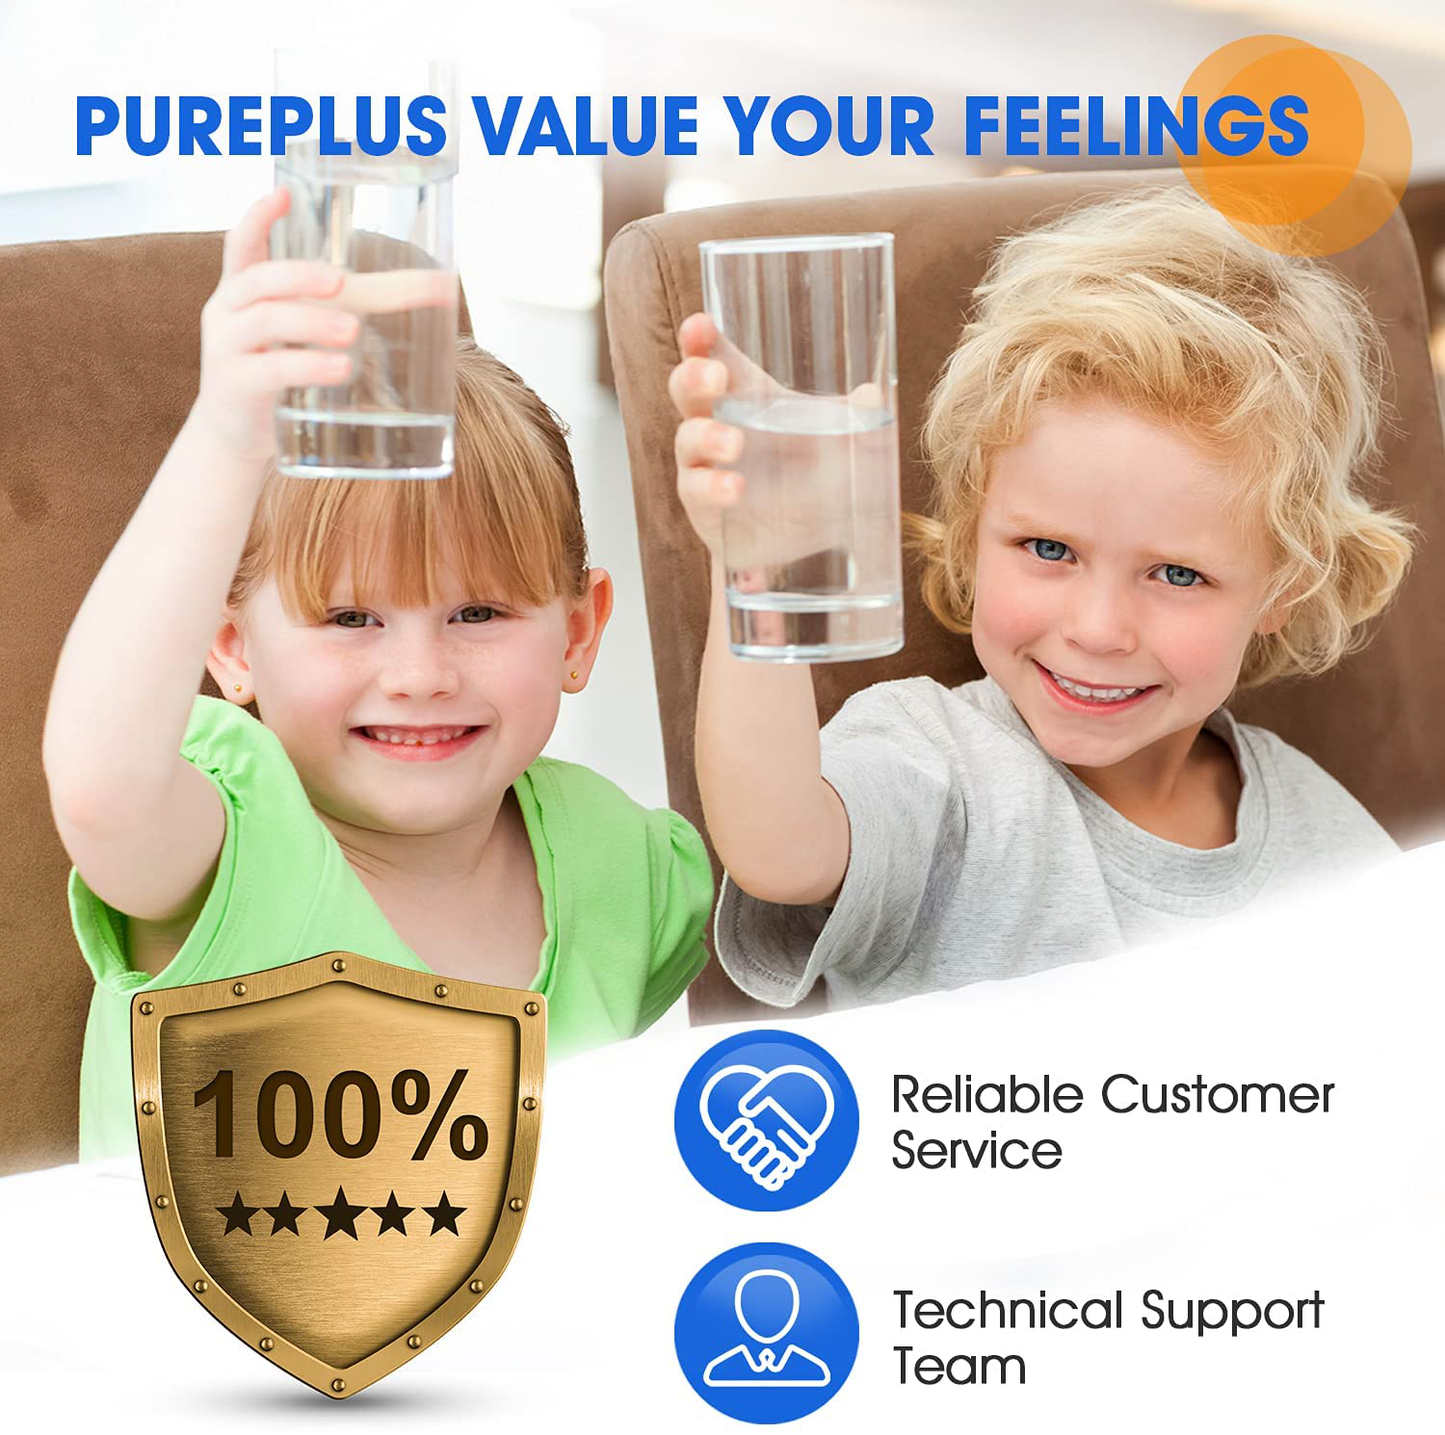 PUREPLUS CRF950Z Pitcher Water Filter Replacement for Pur PPF900Z, PPF951K, PPT700W, CR-1100C, DS-1800Z, CR-6000C, PPT711W, PPT711, PPT710W, PPT111W, PPT111R and All PUR Pitchers and Dispensers, 4PACK